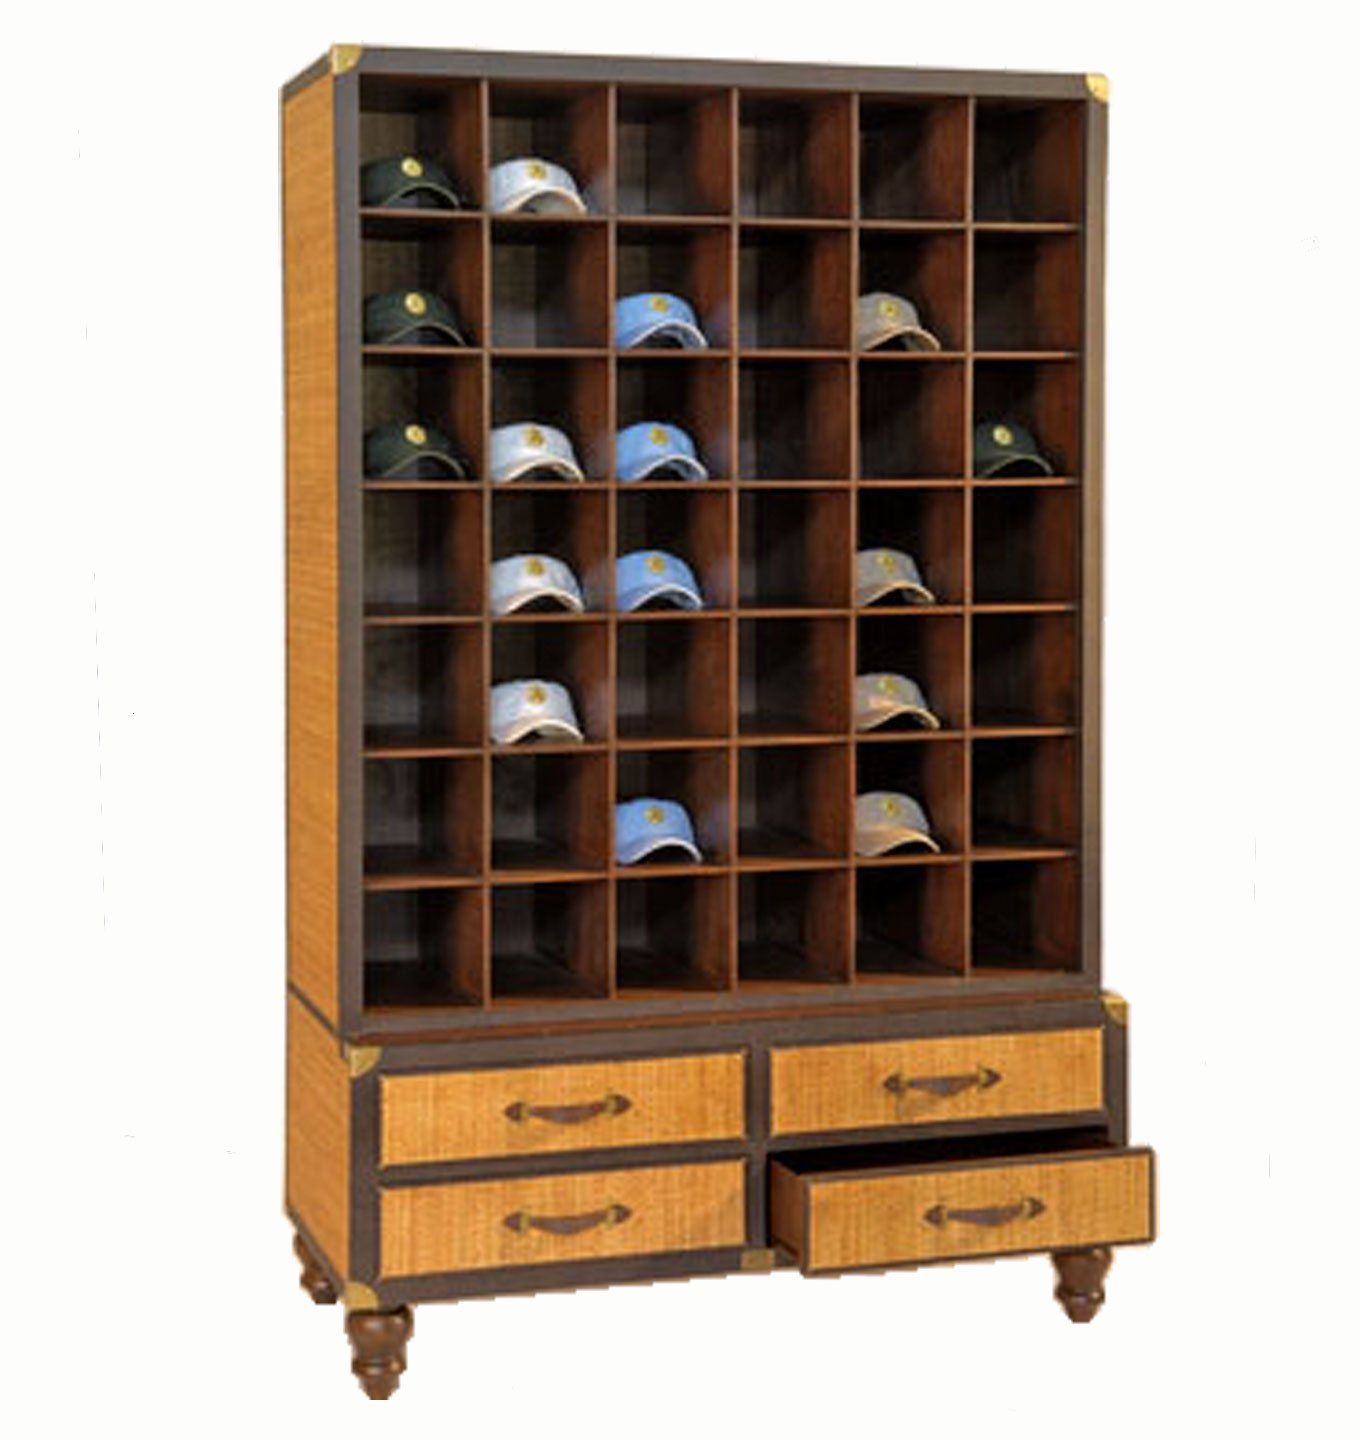 Hat Display (Shown in Stiles Brothers Finish)